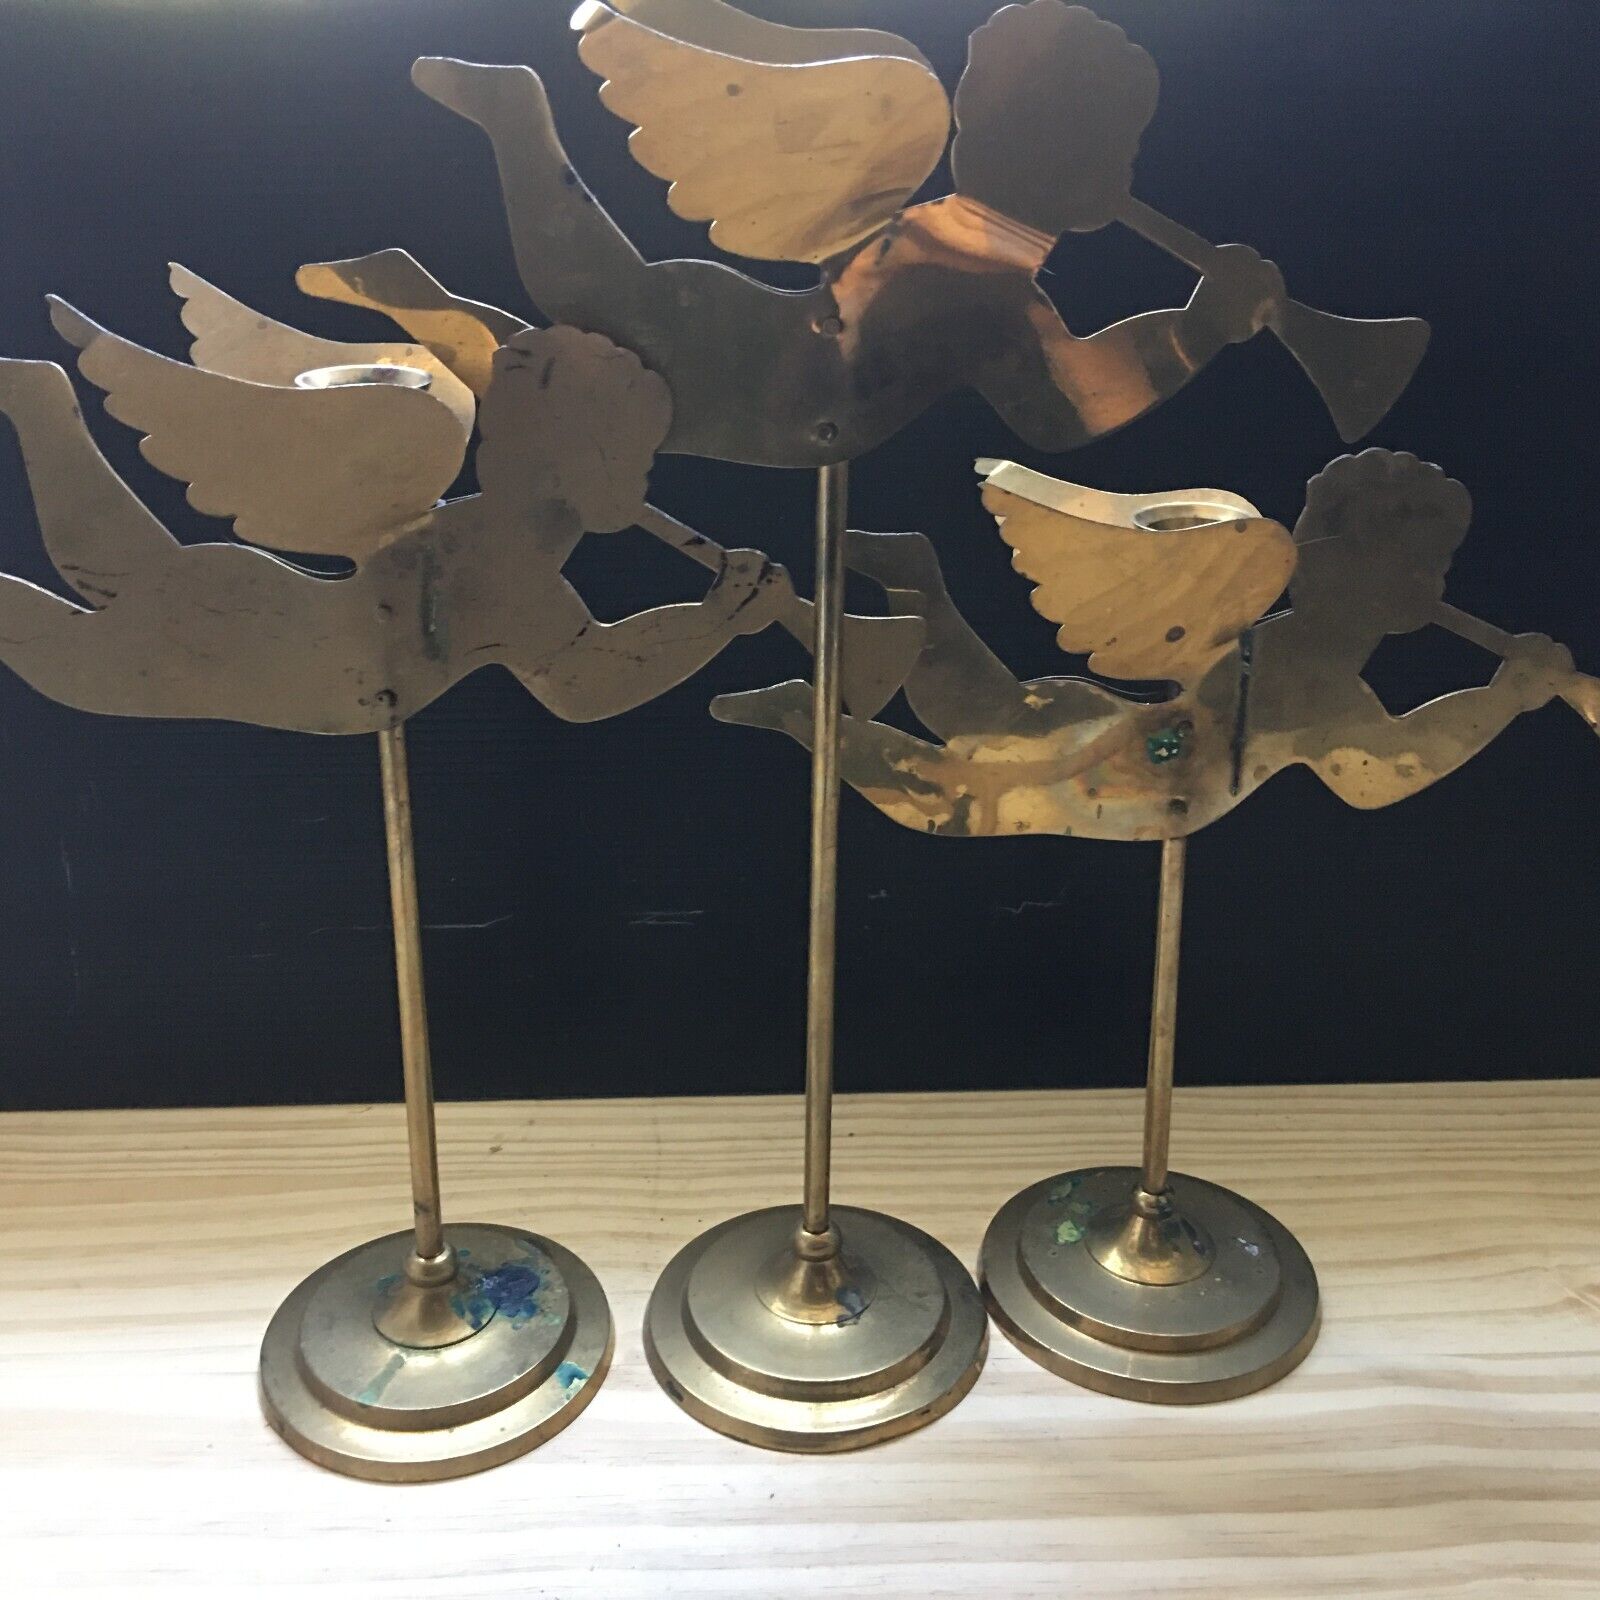 Vintage 1980s Brass Flying Angel Candle Holders Candlestick Display Set of 3